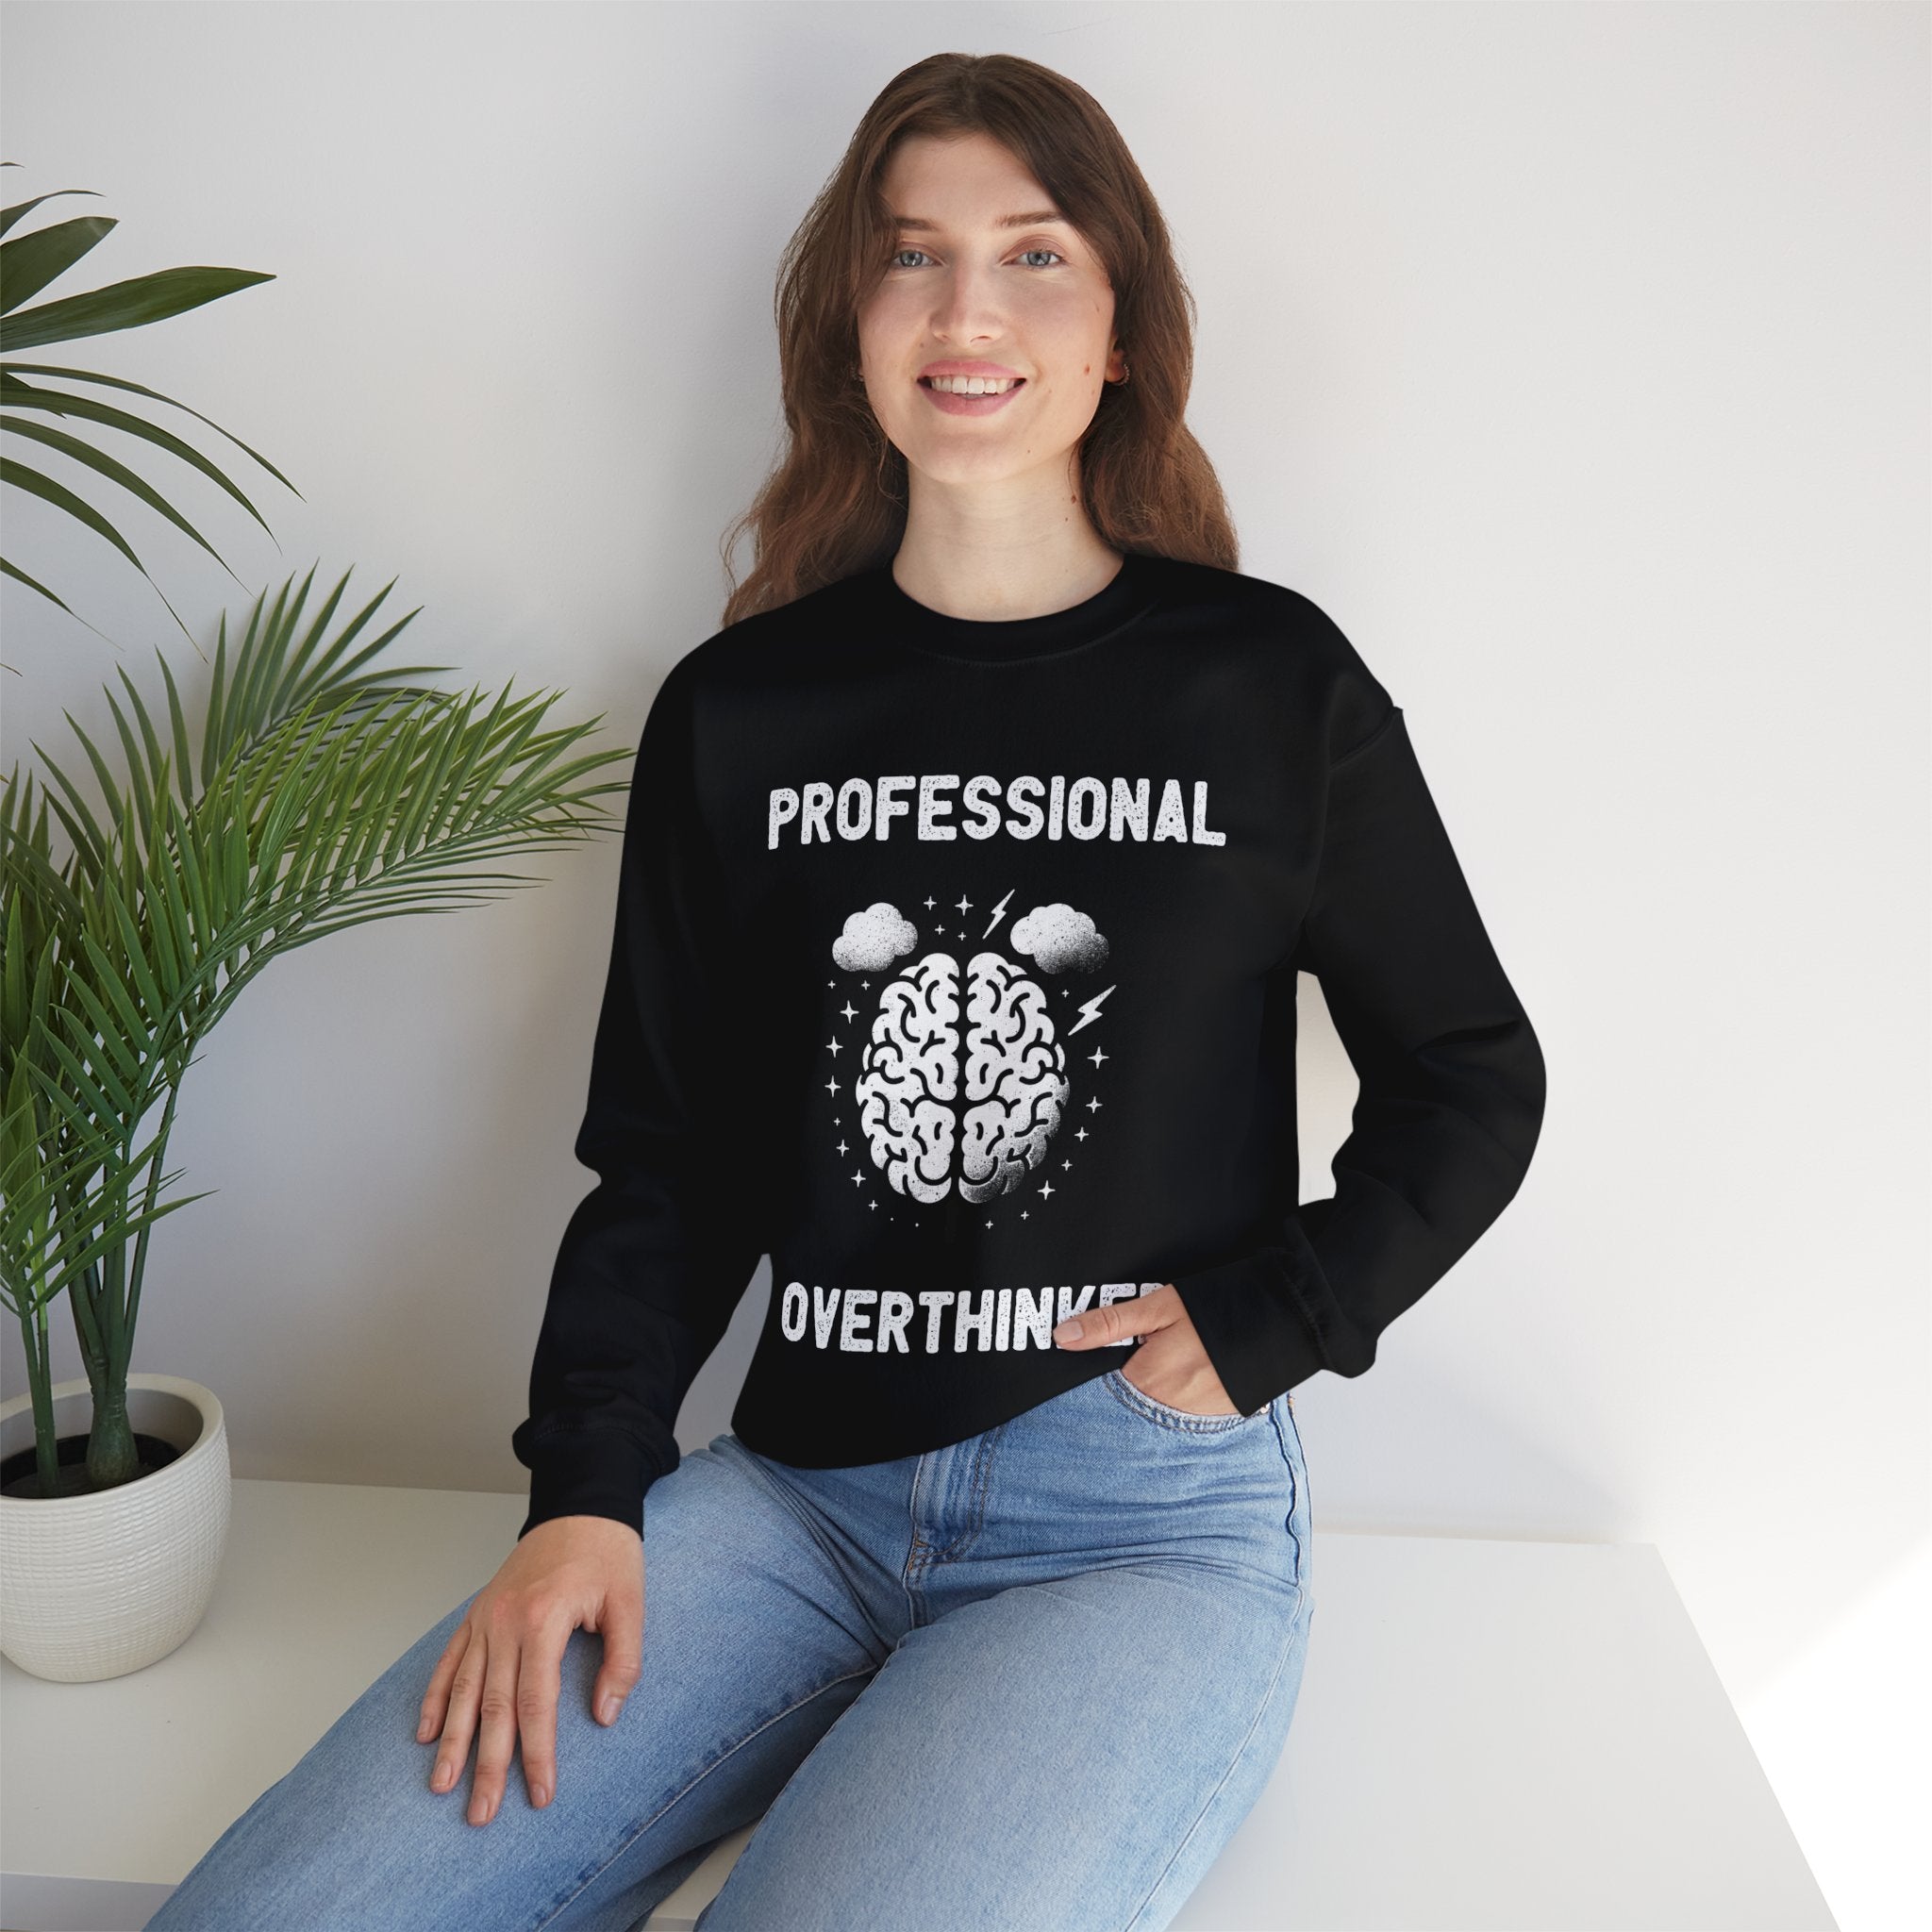 A woman smiling, wearing a Professional Overthinker - Sweatshirt that reads "Professional Overthinker" with an illustration of a brain. She is seated next to a potted plant, looking comfy and cool in the perfect warmth for colder months.